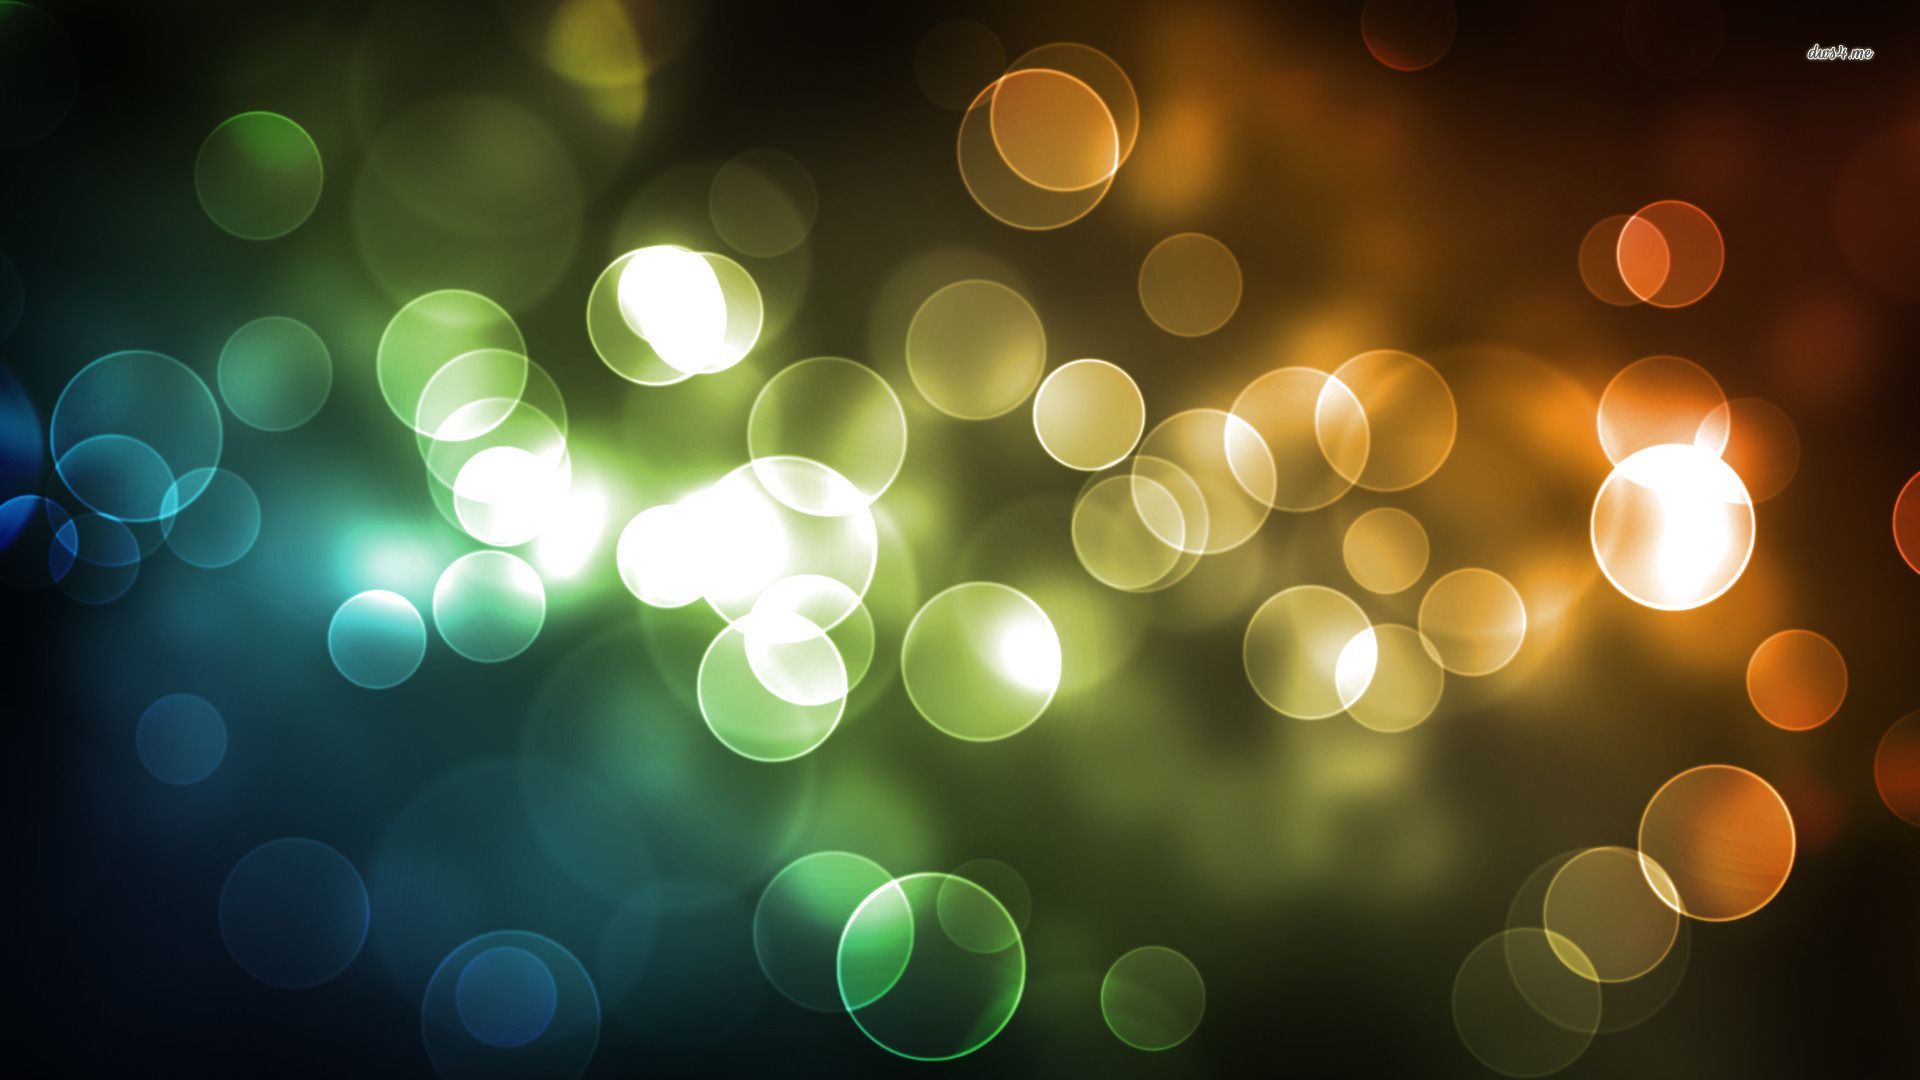 Blurry Bubbles wallpaper - Abstract wallpapers - #3355